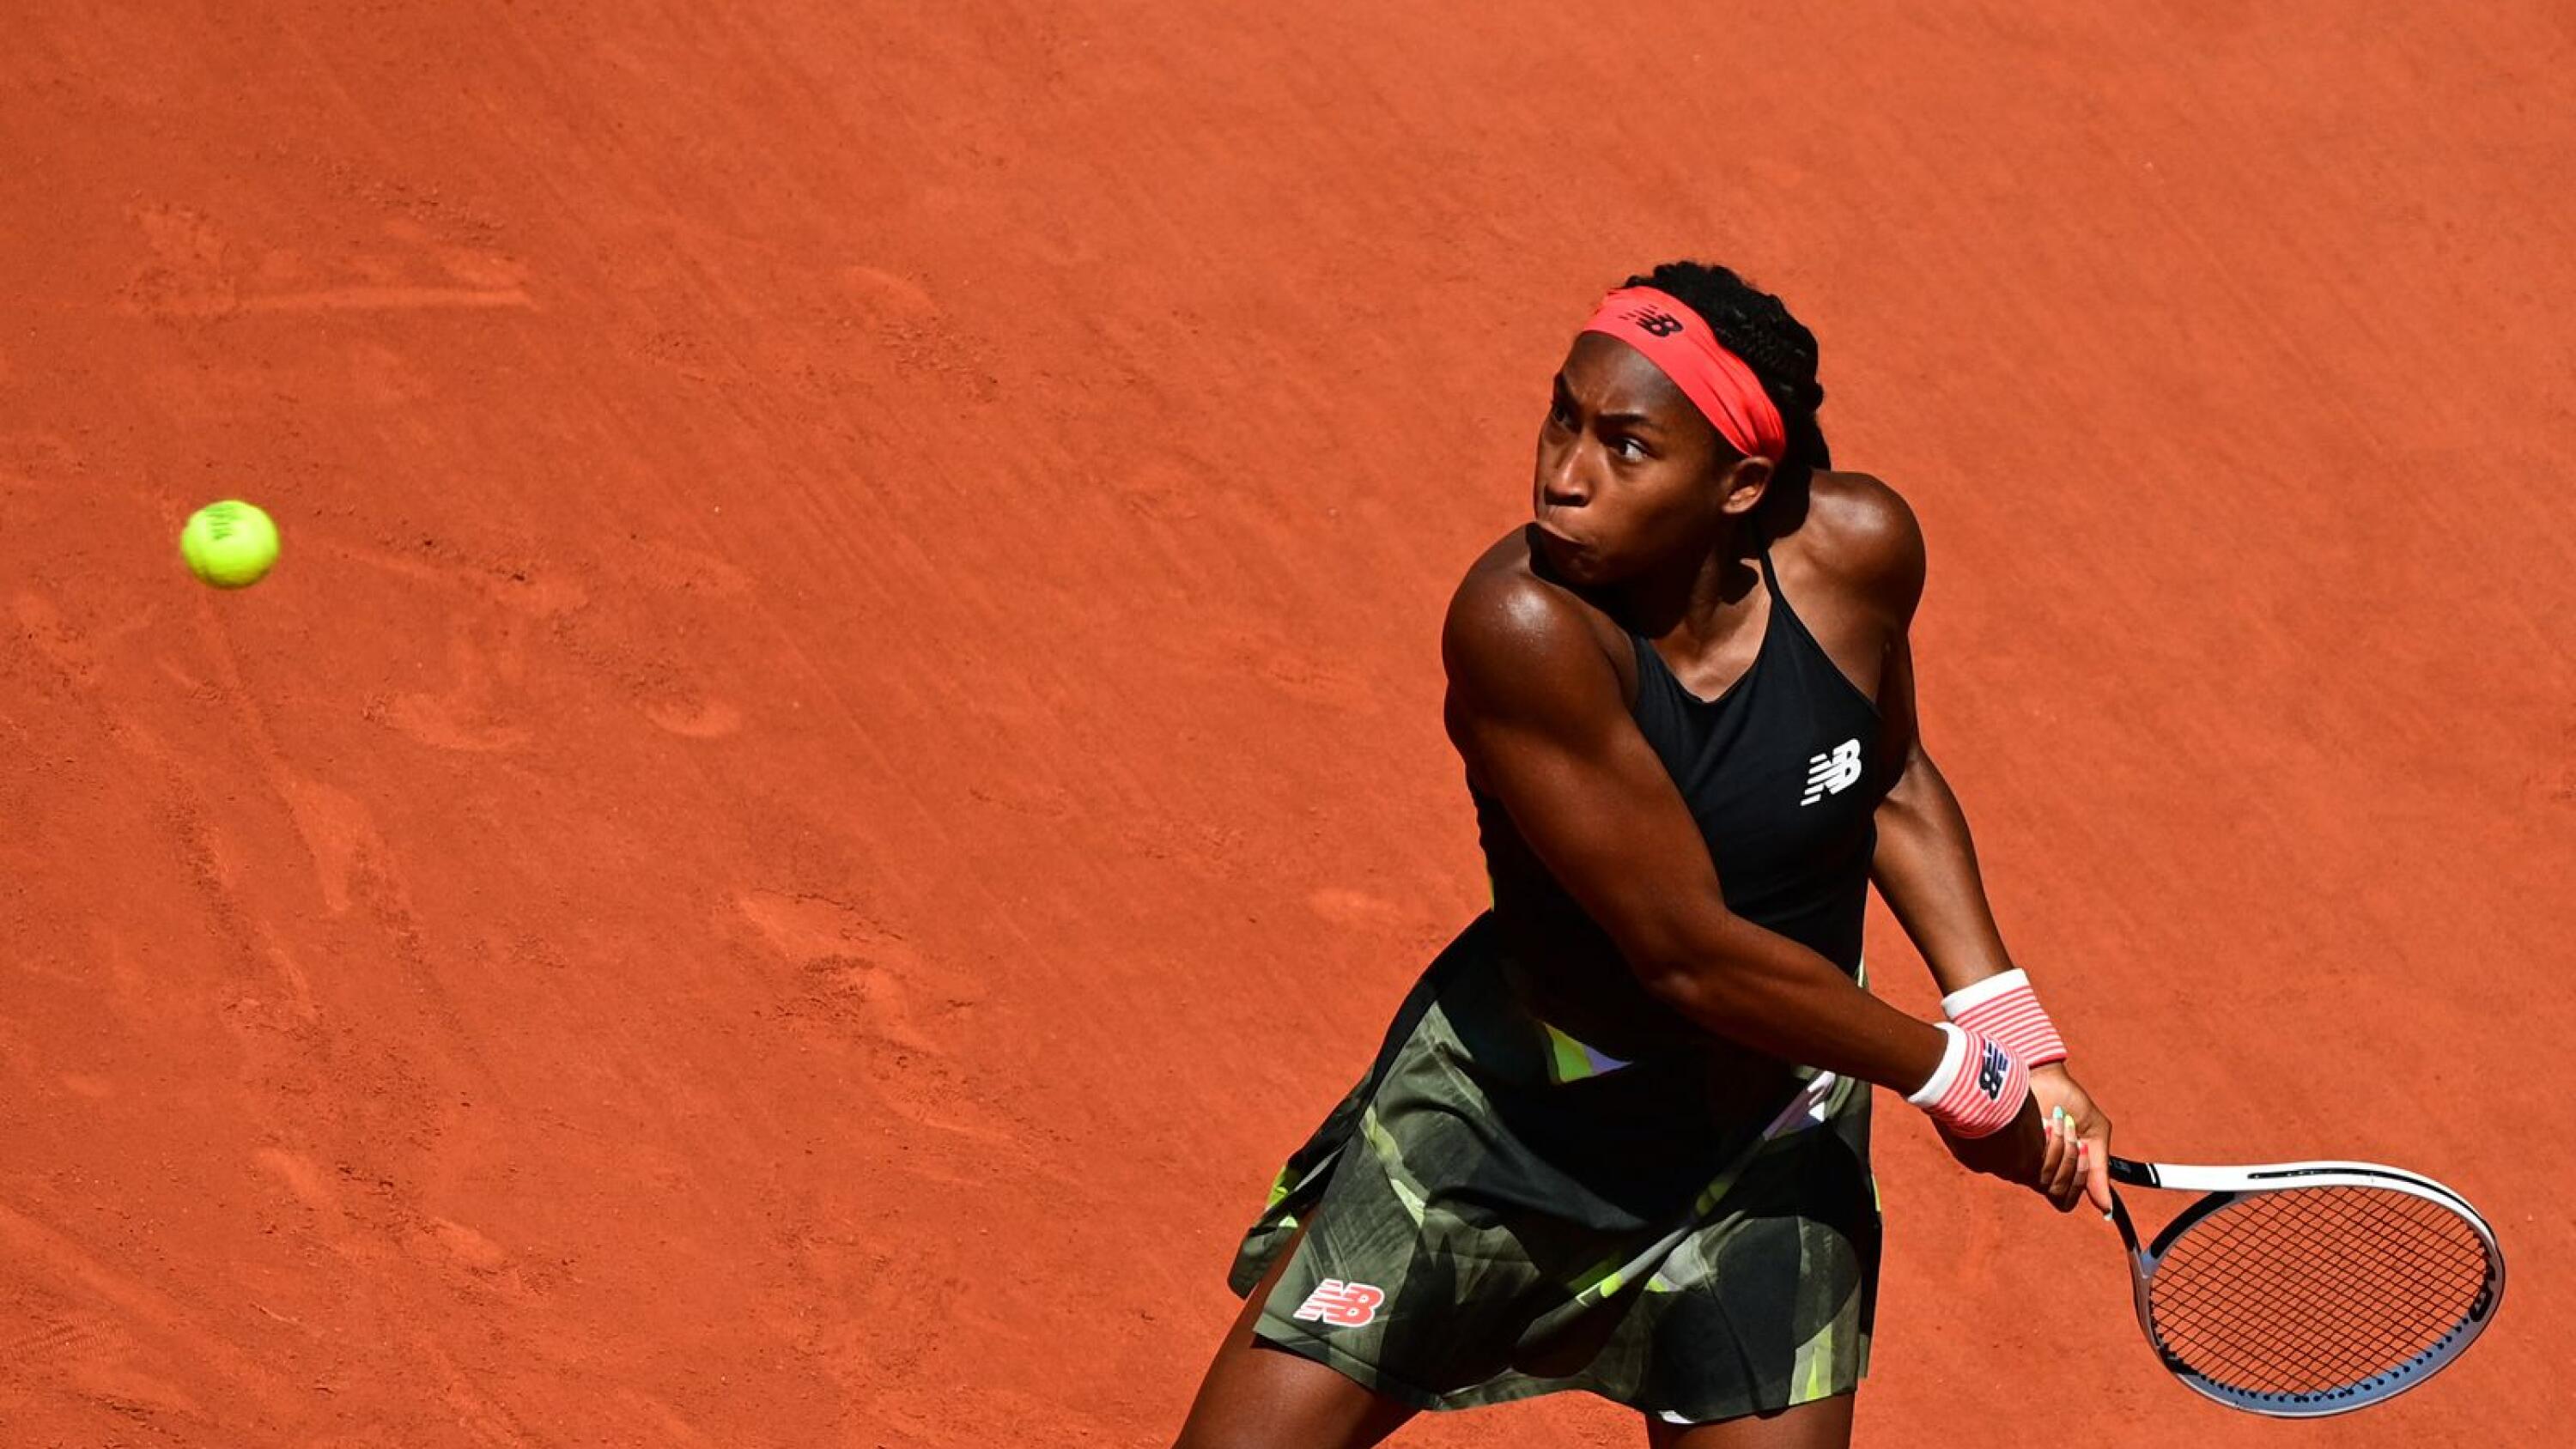 Coco Gauff of the US returns the ball to Tunisia's Ons Jabeur during their women's singles fourth round tennis match on Day 9 of The Roland Garros 2021 French Open tennis tournament in Paris on Monday